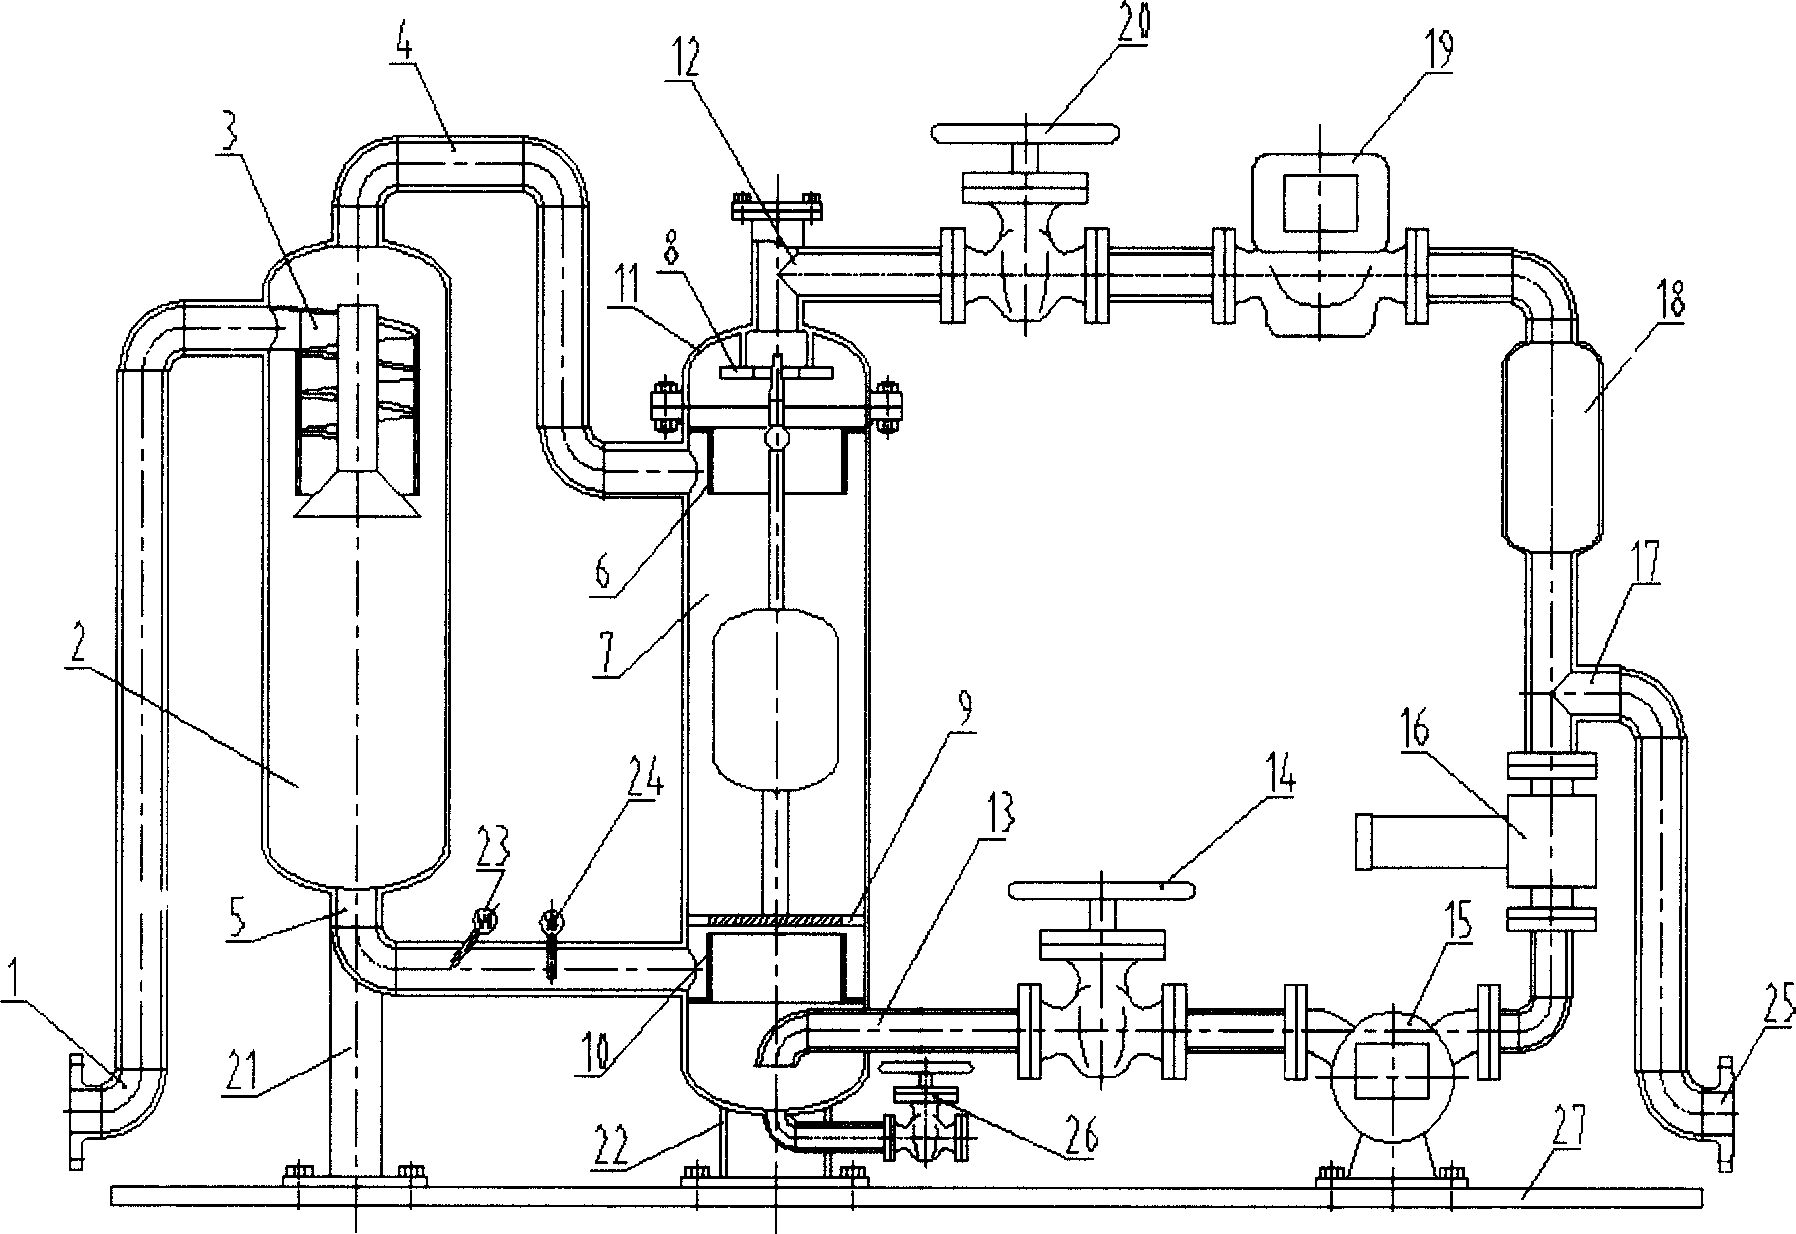 Automatic metering device for oil, water and gas three-phase flow